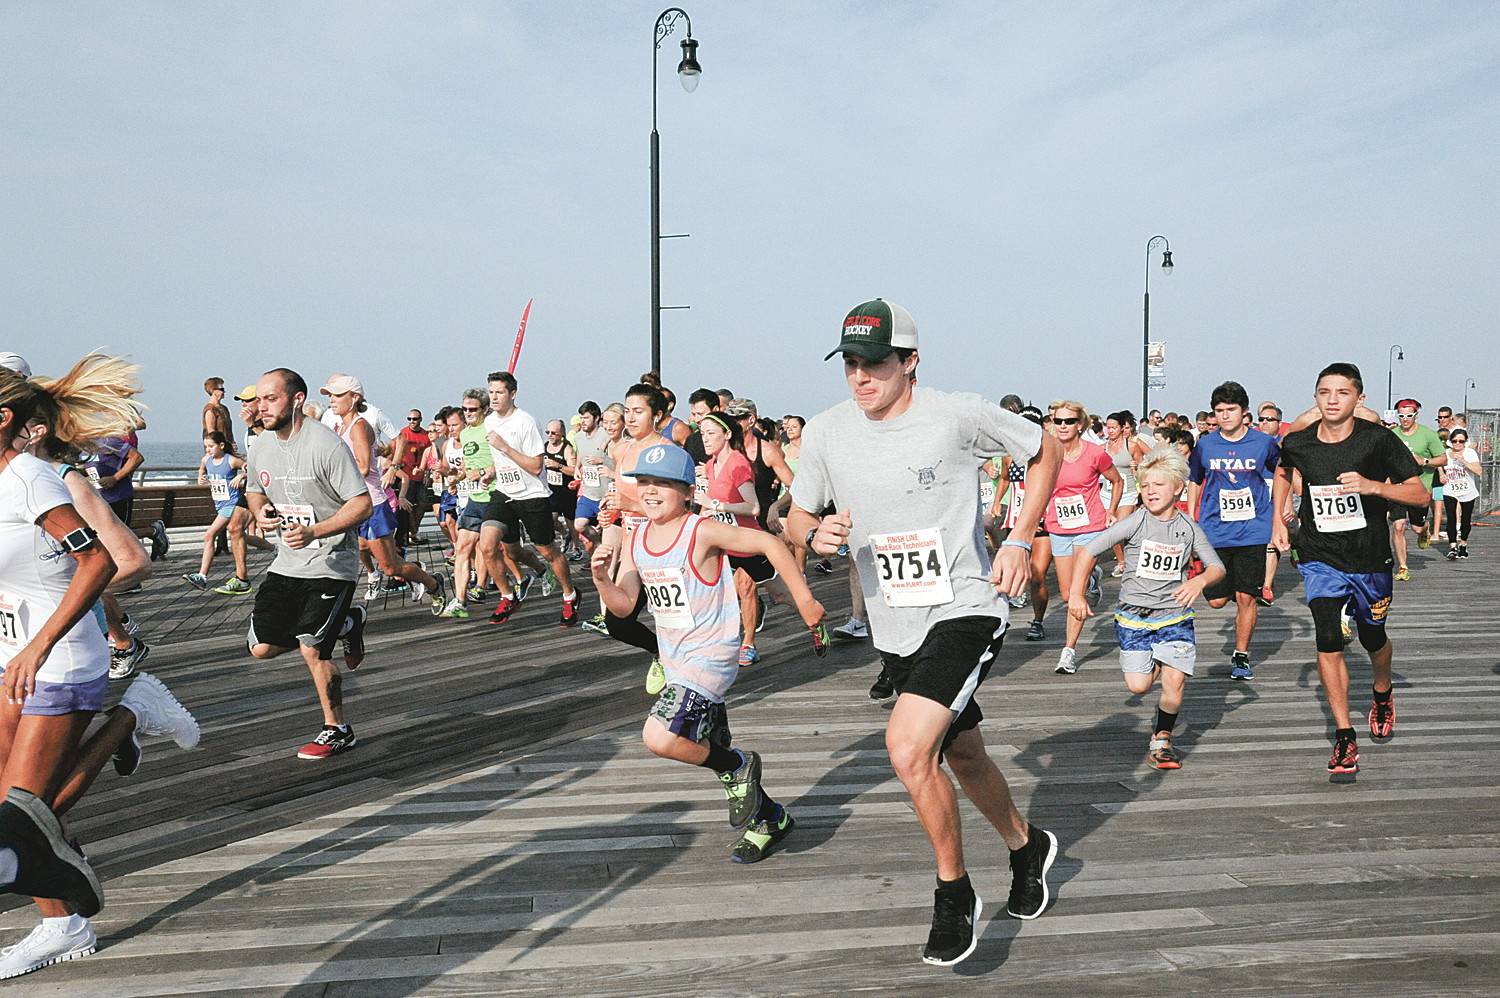 More than 300 people participated in the annual 5K race.